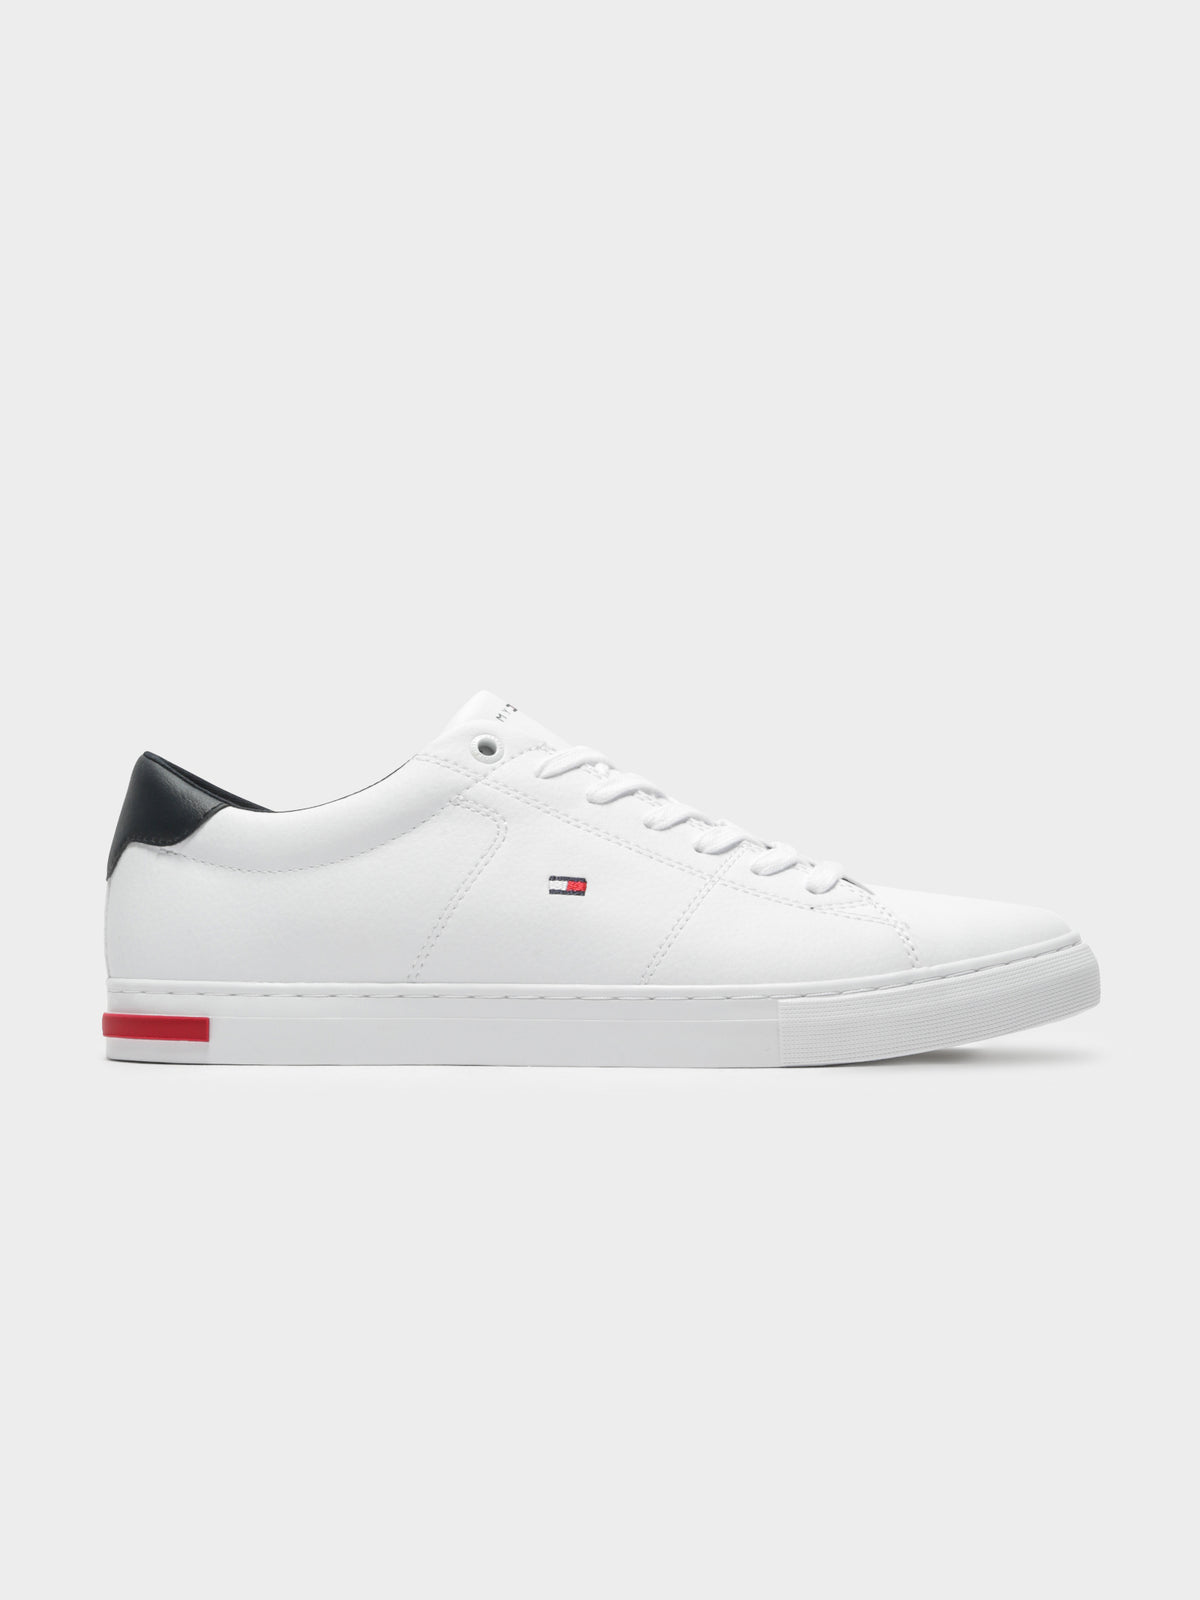 Essential Leather Detail Vulc Sneakers in White